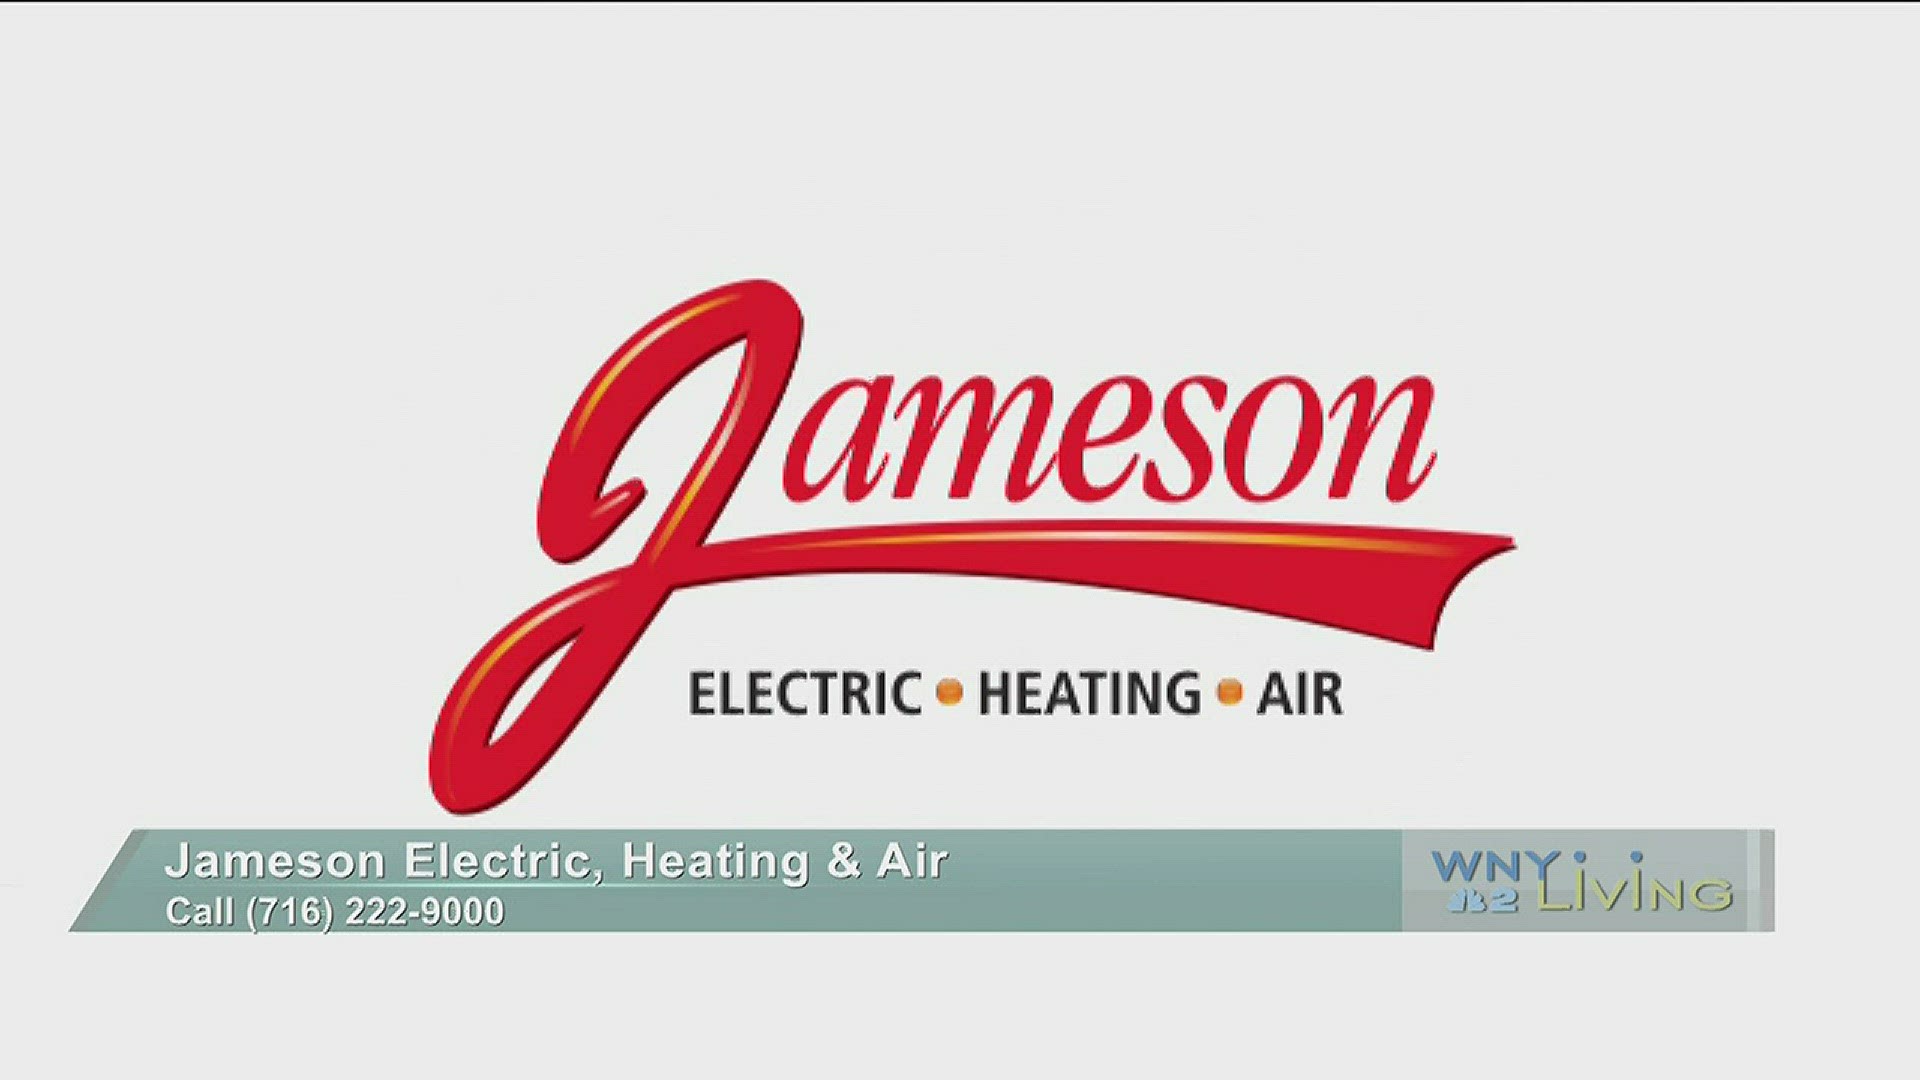 WNY Living - September 15 - WECK Jameson Electric, Heating and Air